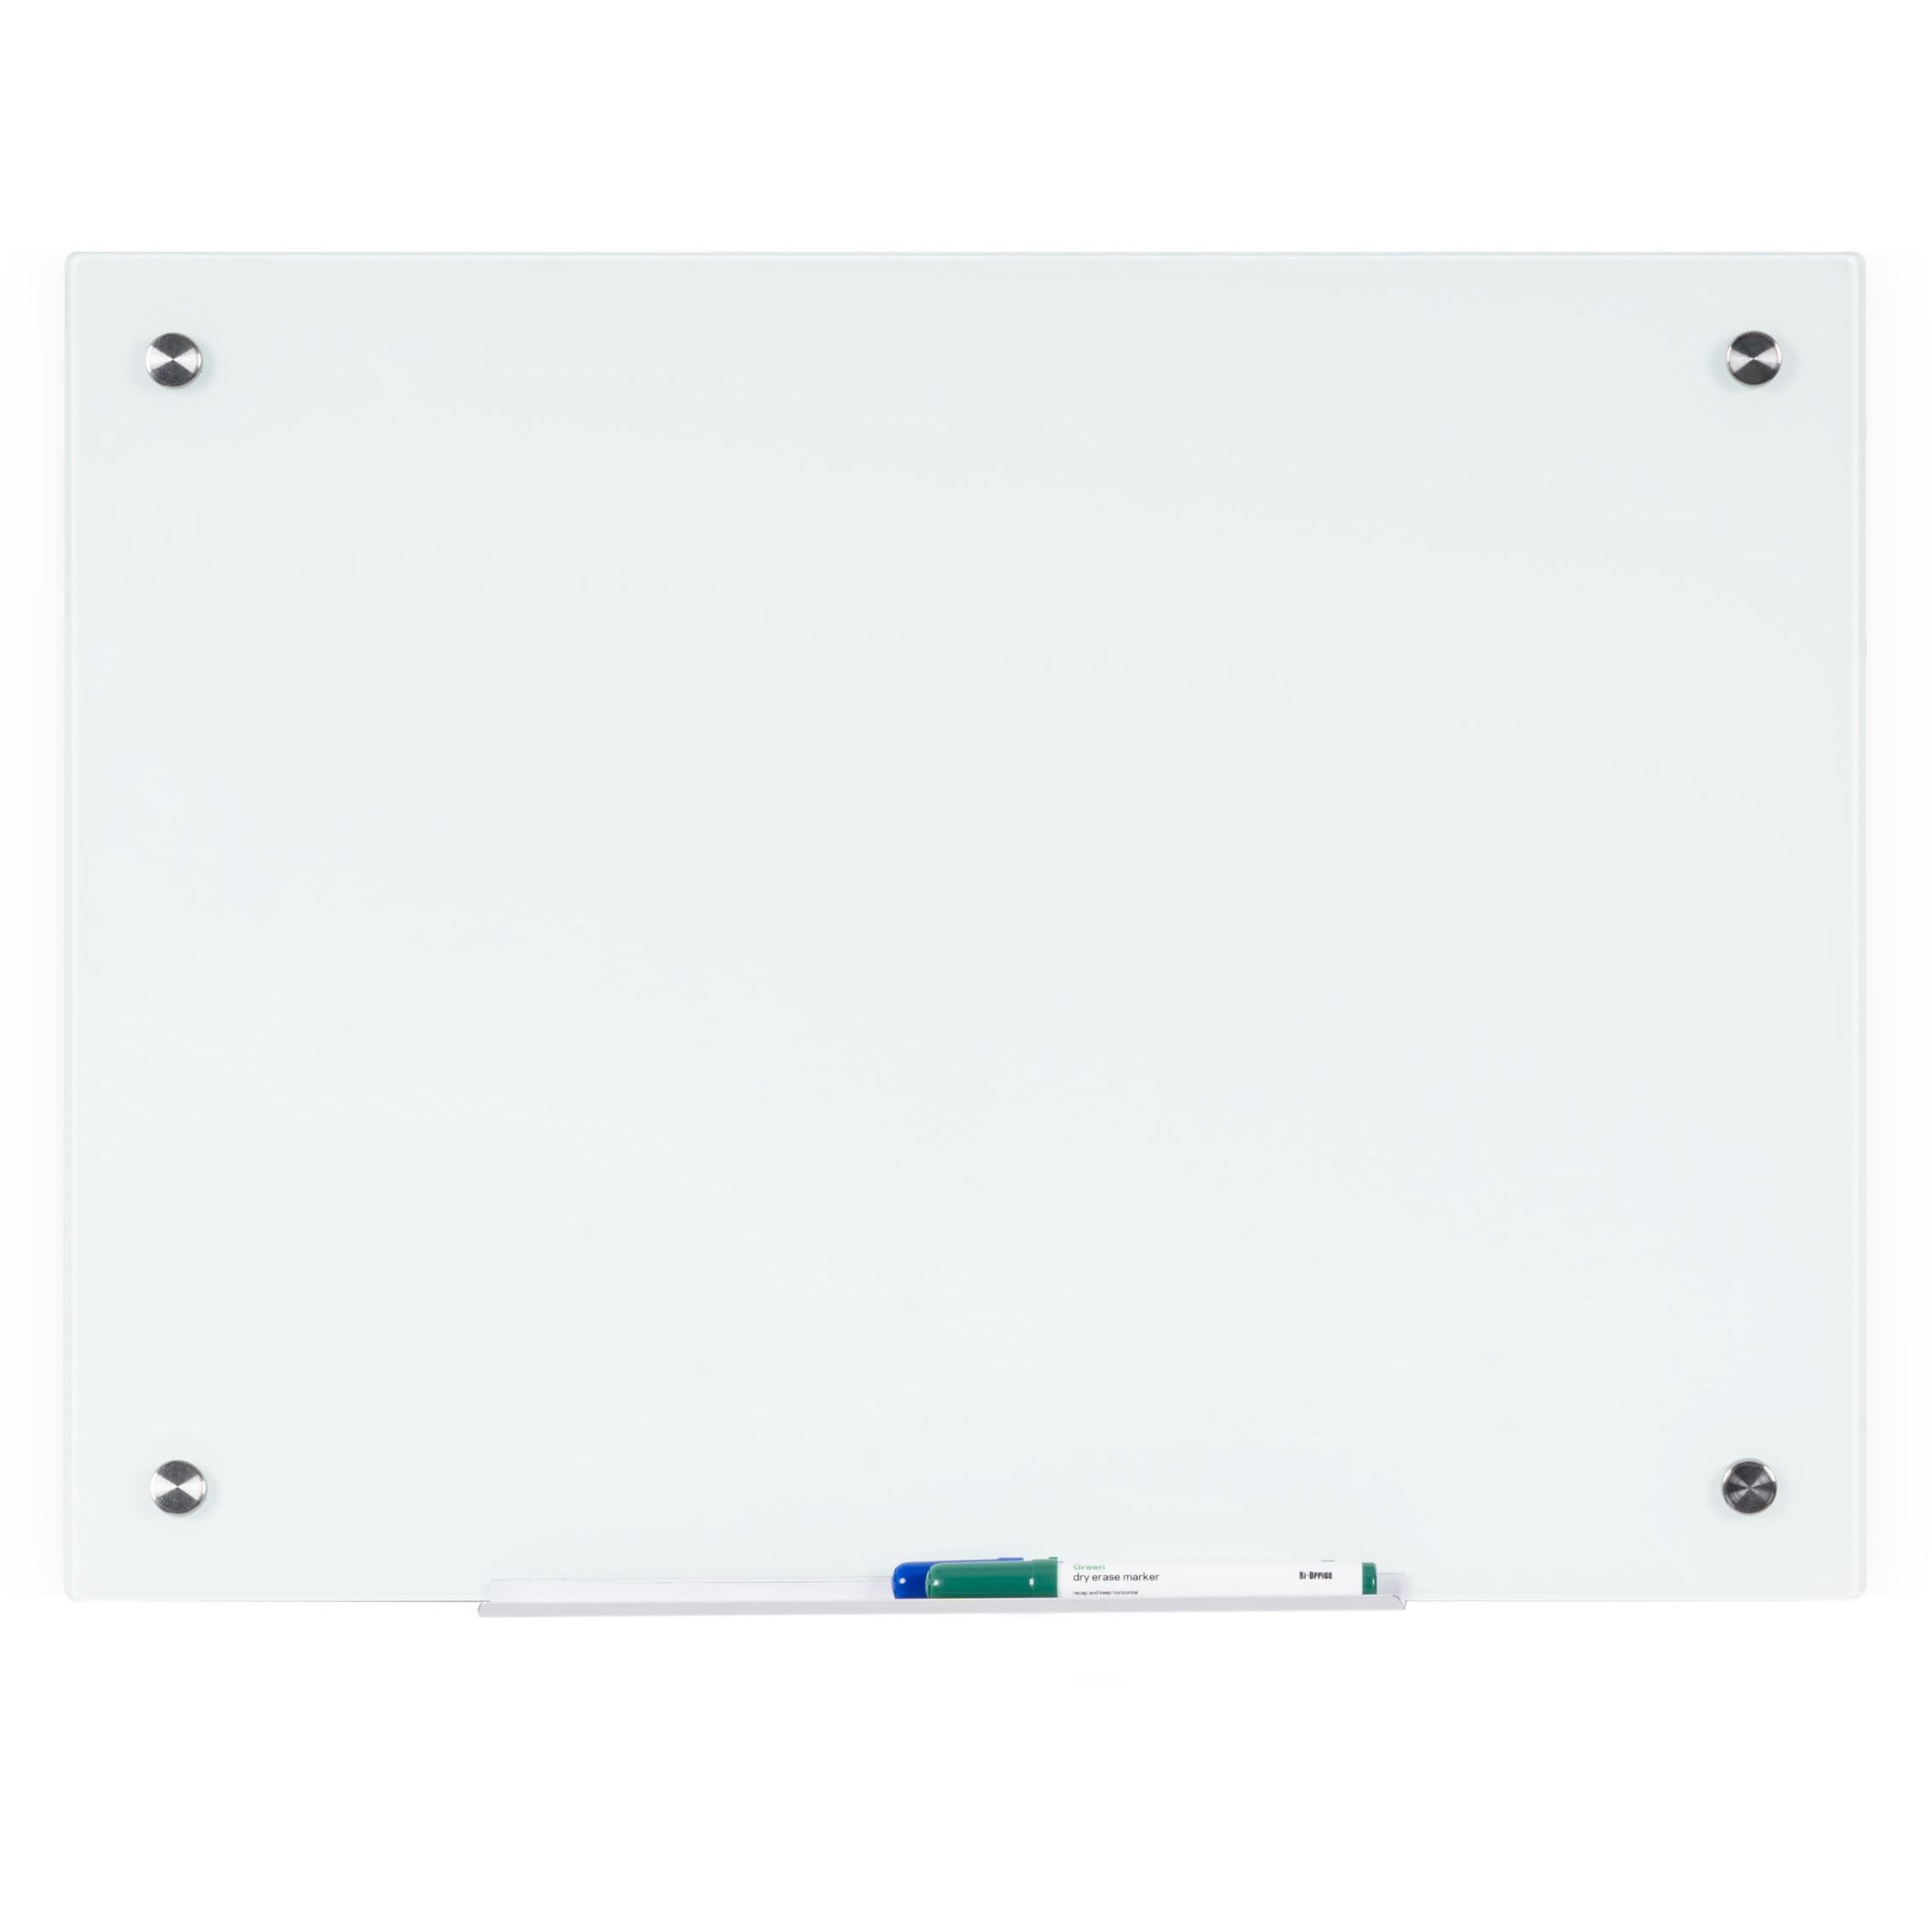 GL080107 River Magnetic Dry Erase Tempered Glass White Board, 36" x 48", Frameless Design, Wall Mount Kit Included by MasterVision